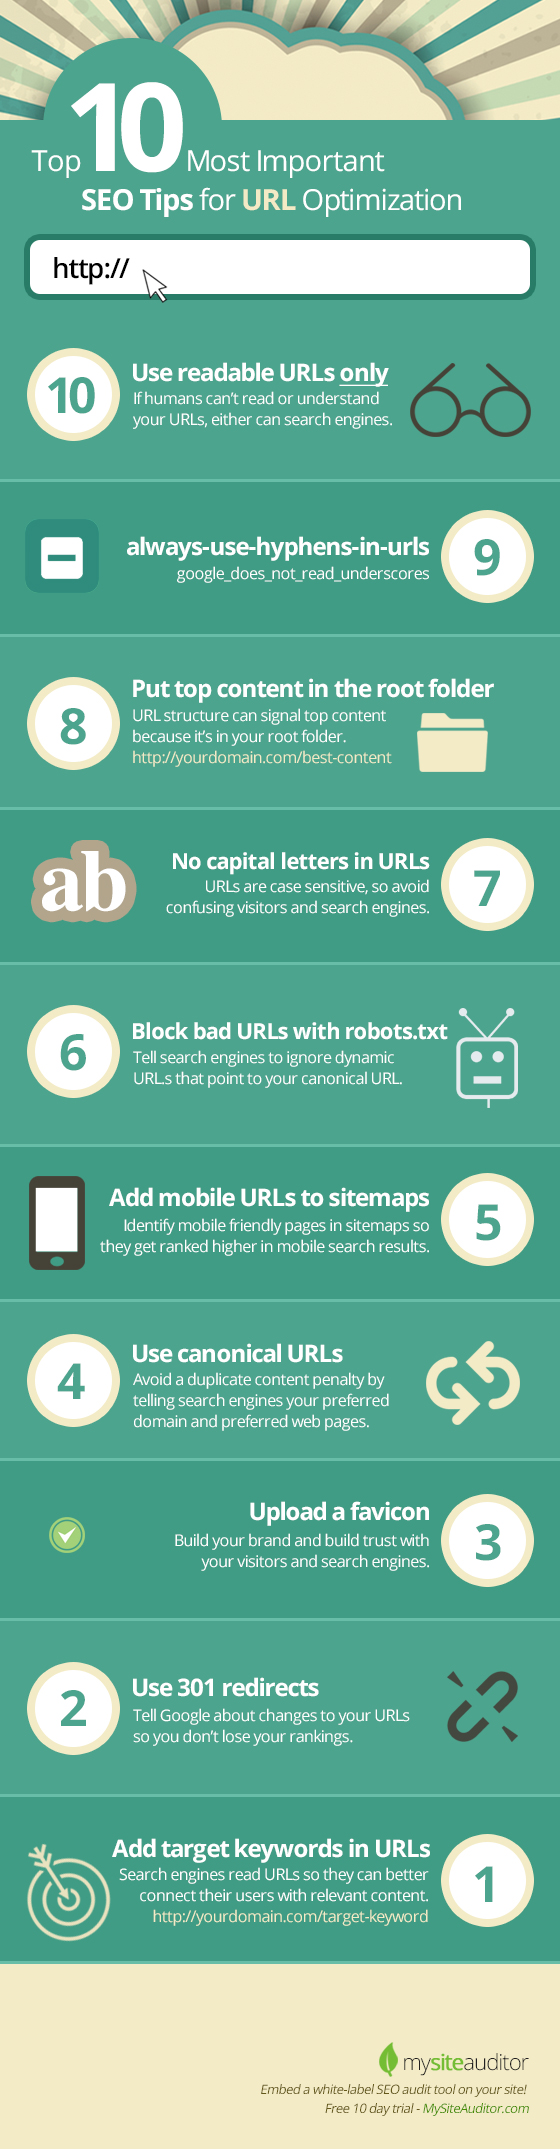 10 Top Ways To Optimize Your URL For Search Engines (Infographic) image how to optimize url for seo21.jpg21